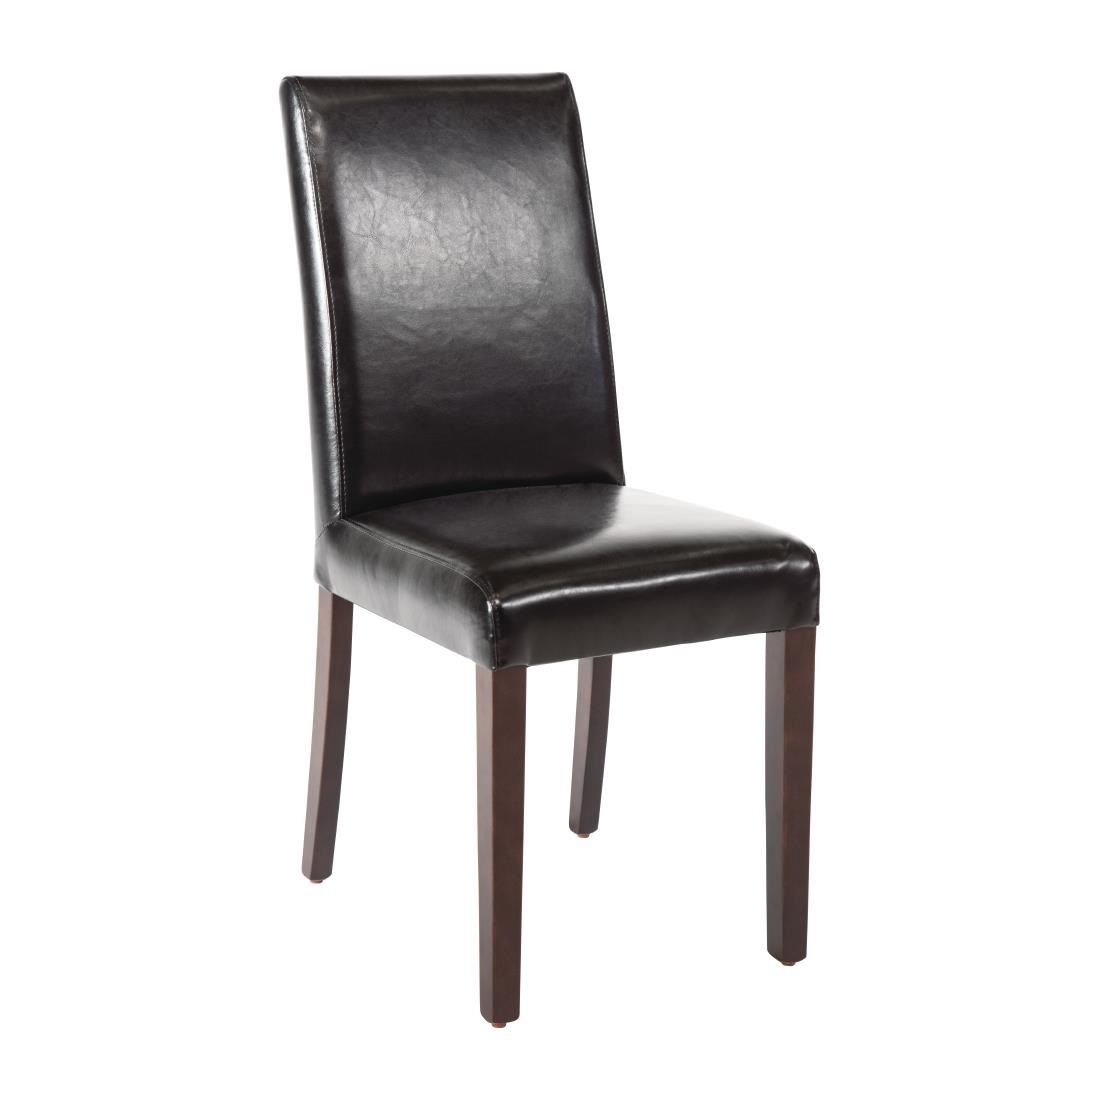 Faux Leather Dining Chair - Black